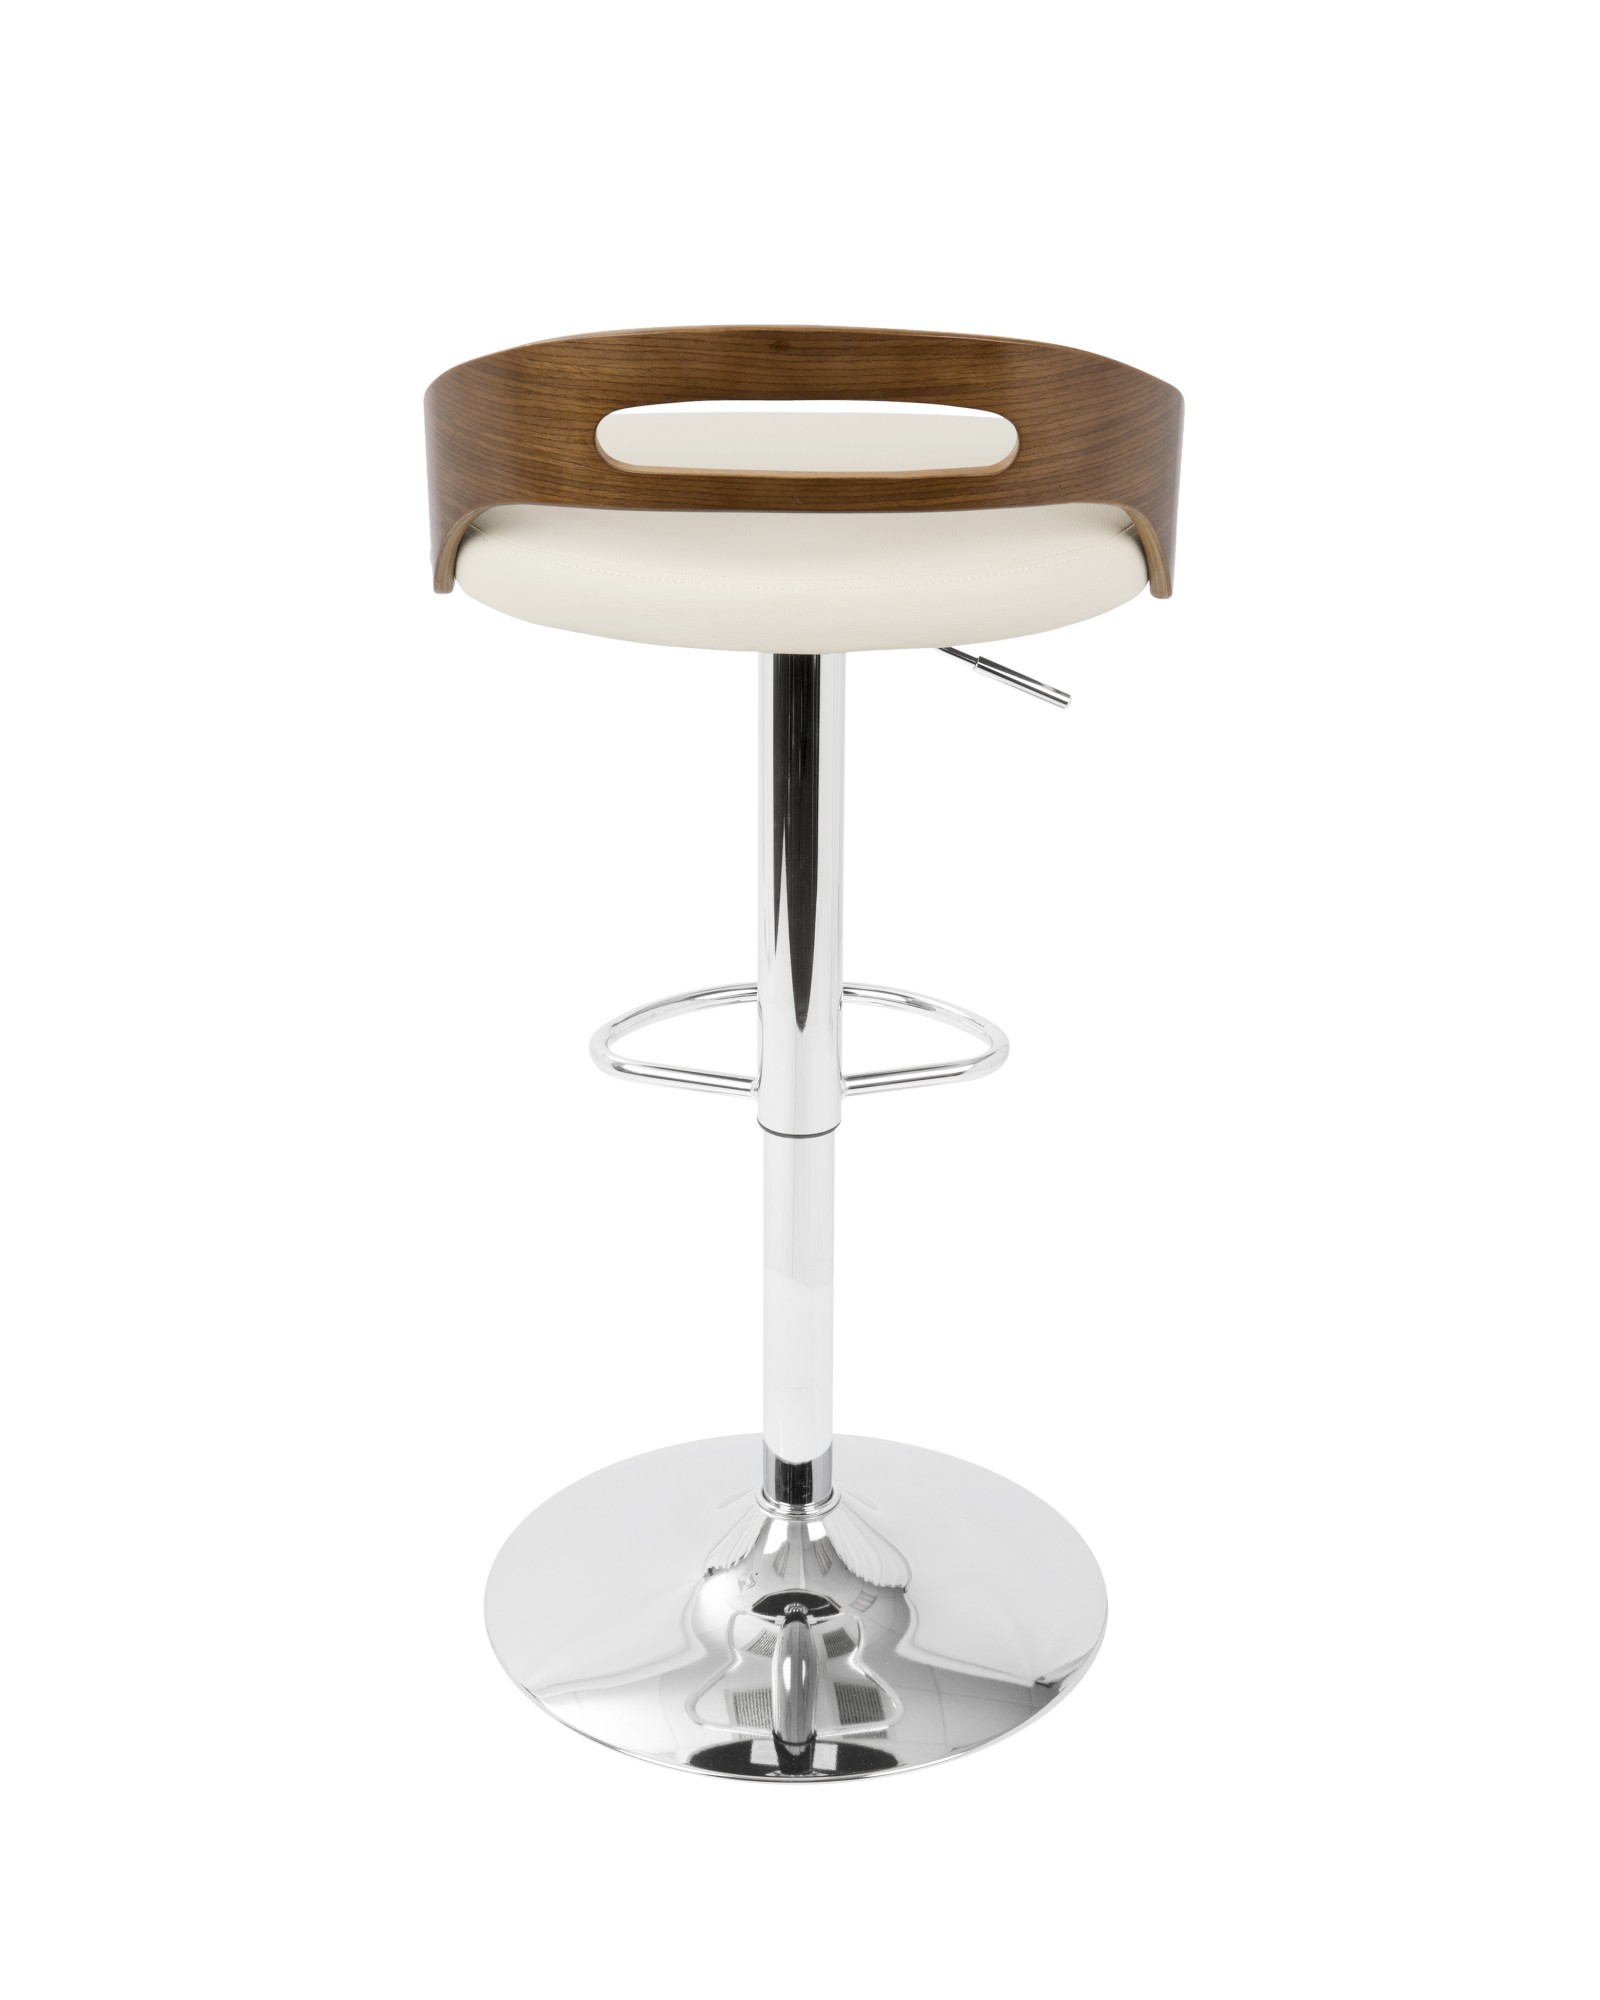 Cassis Mid-Century Modern Adjustable Barstool with Swivel in Walnut And Cream Faux Leather